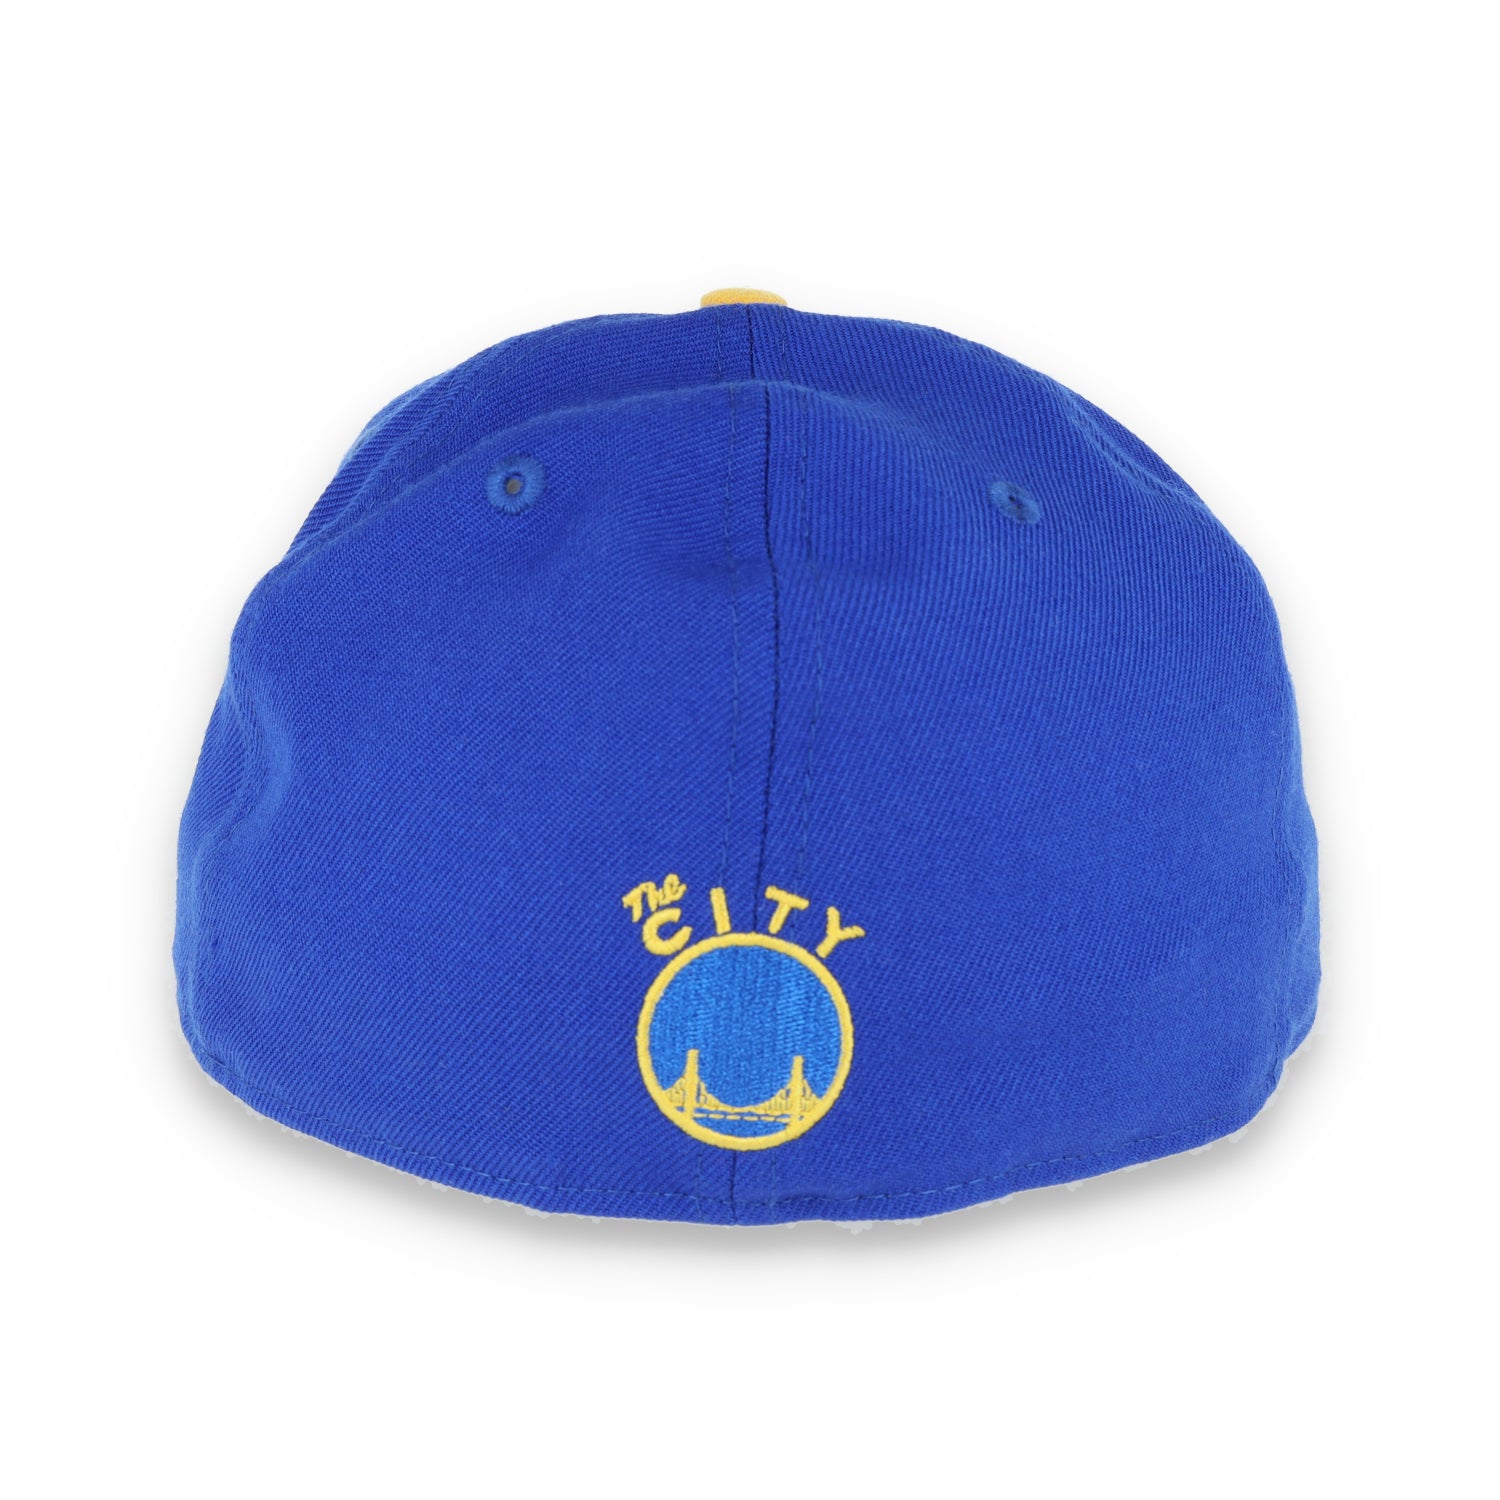 GOLDEN STATE WARRIORS NEW ERA 59FIFTY HAT THE CITY-BLUE/YELLOW